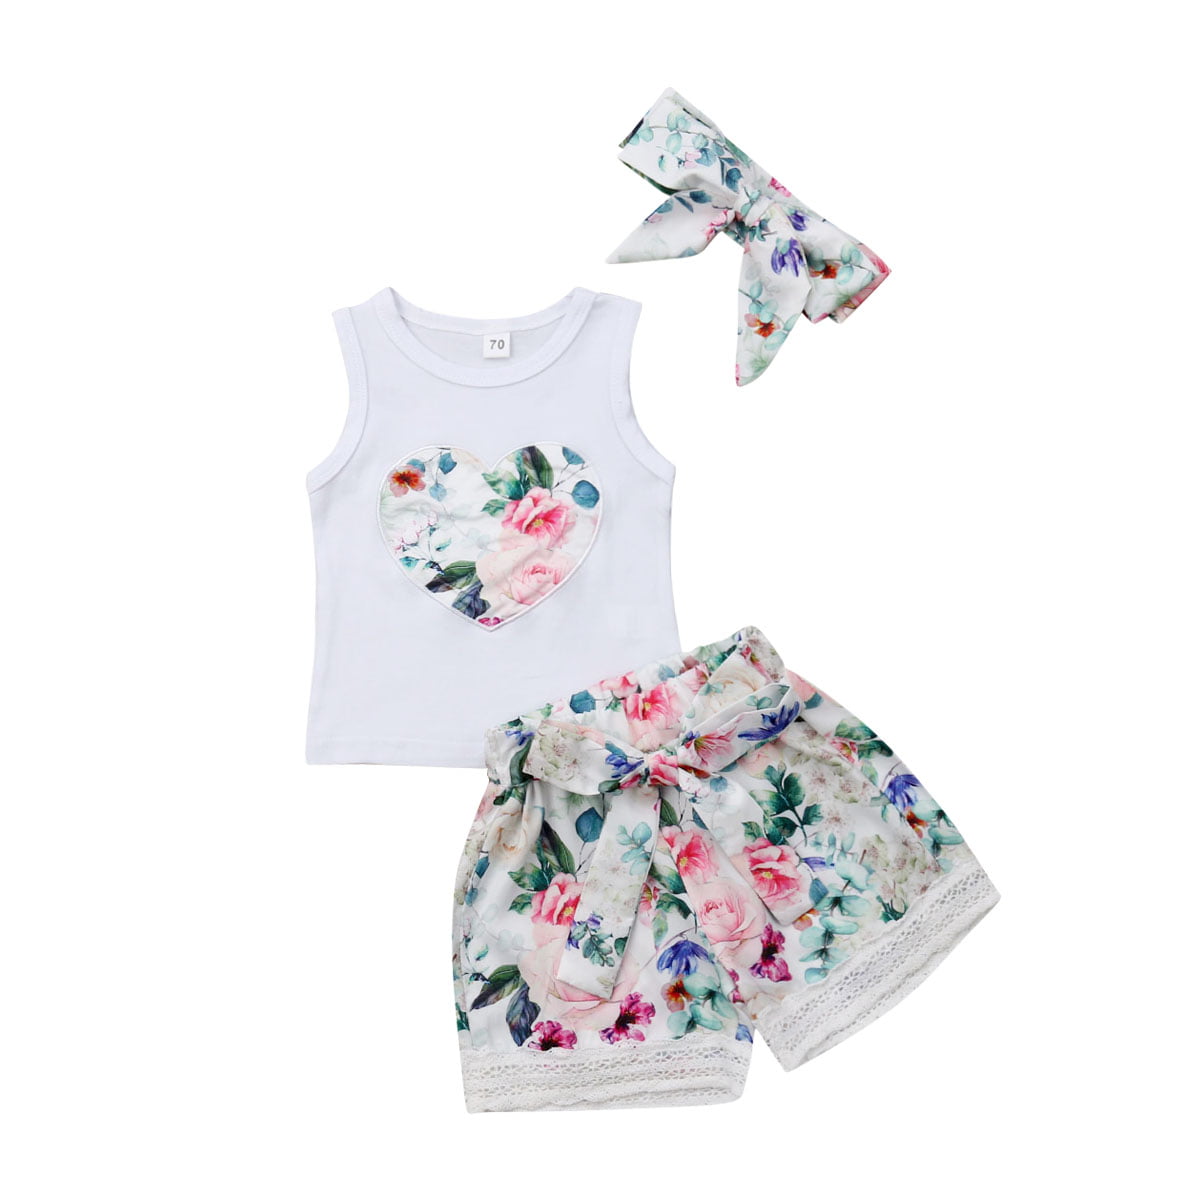 Amazing Kids Baby Girl Heart Floral Outfit Suit Sleeveless Top & Pants &Headband 